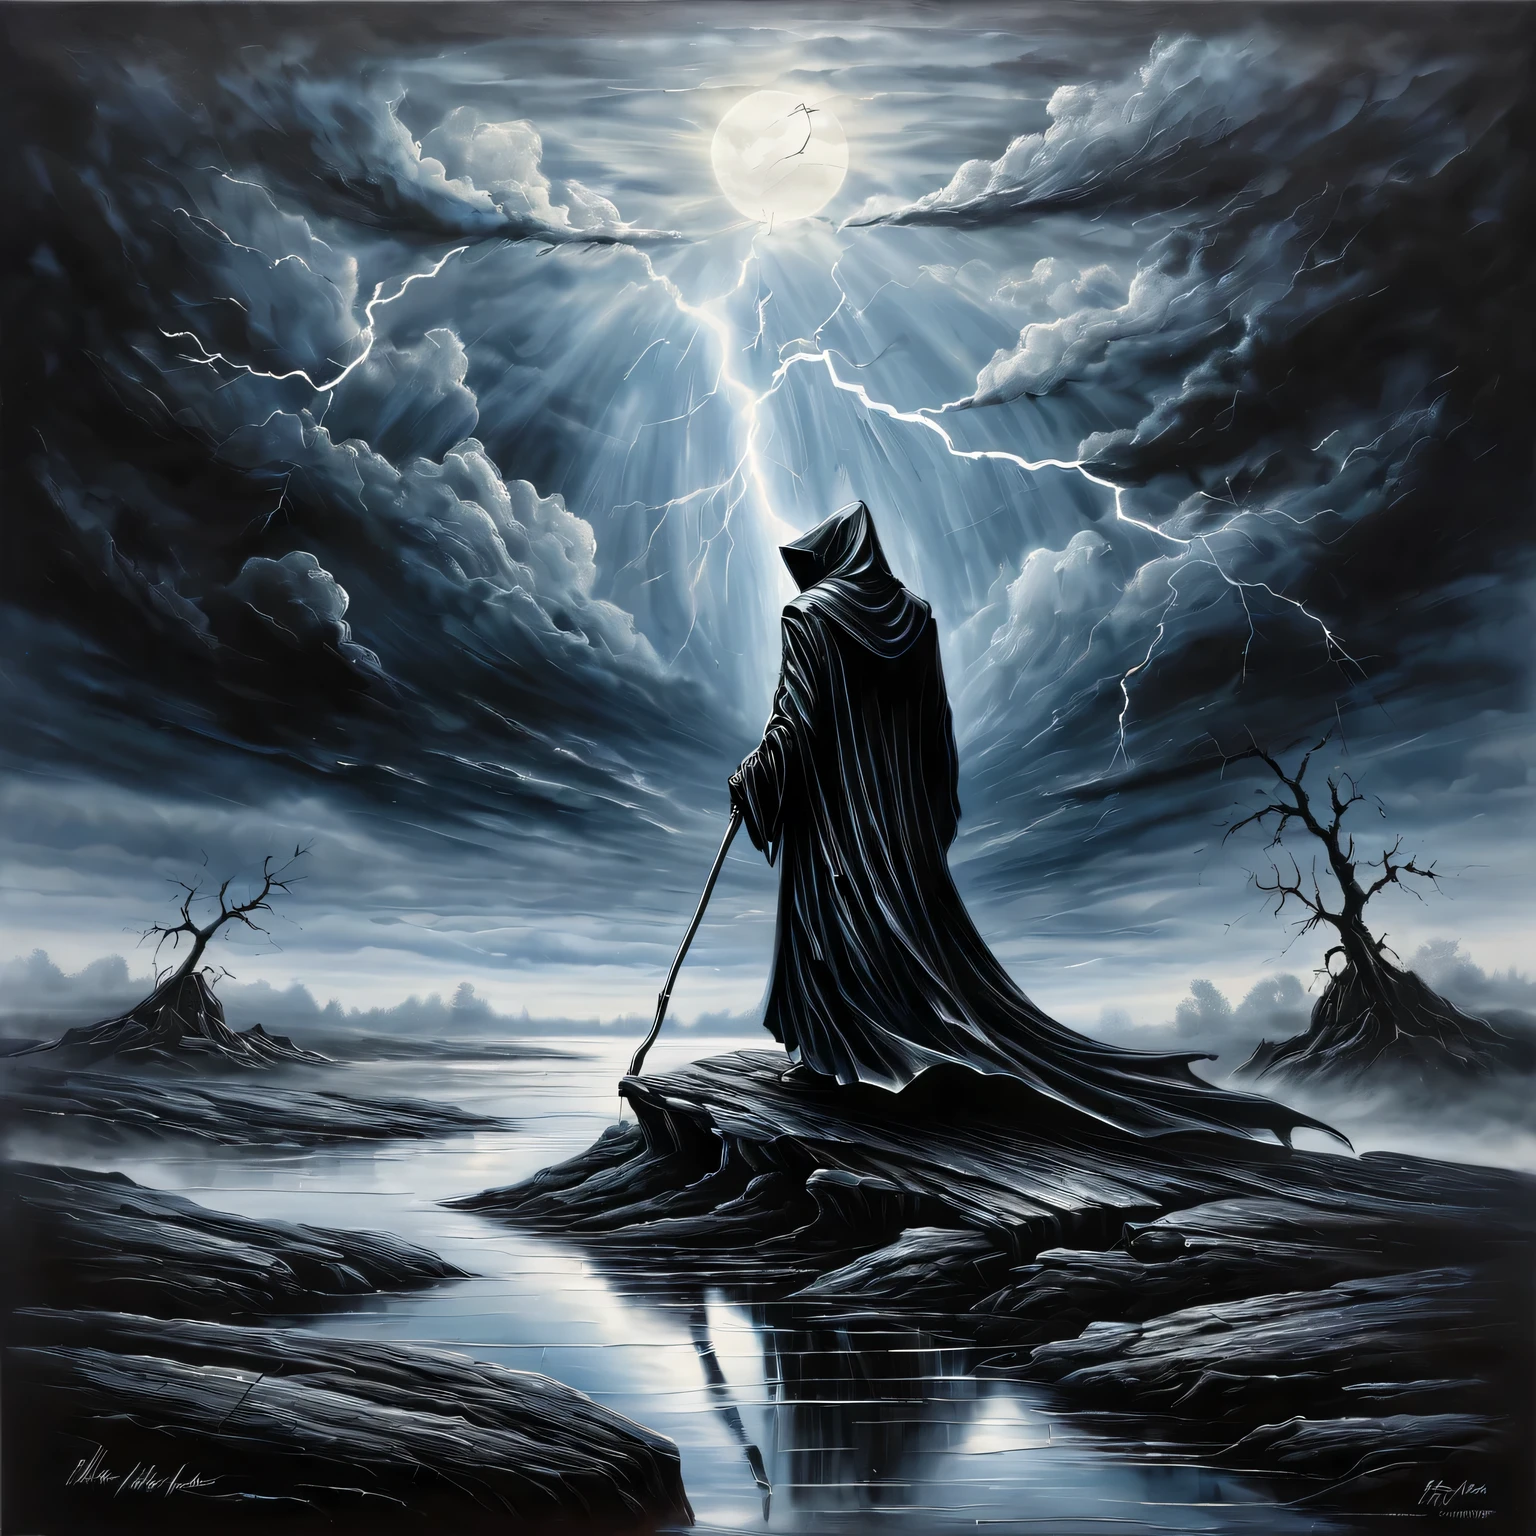 ((Liquid Metal Art)), the painting is painted with liquid metal on textured paper and depicts a beautiful minimalistic landscape with a Black Grim Reaper standing on a  rock, Liquid Metal Black Grim Reaper looks ominous and gloomy, in the background is a gloomy sky with clouds and lightning, the painting is made of liquid metal. Metal, masterwork, clear contours, 32 carats